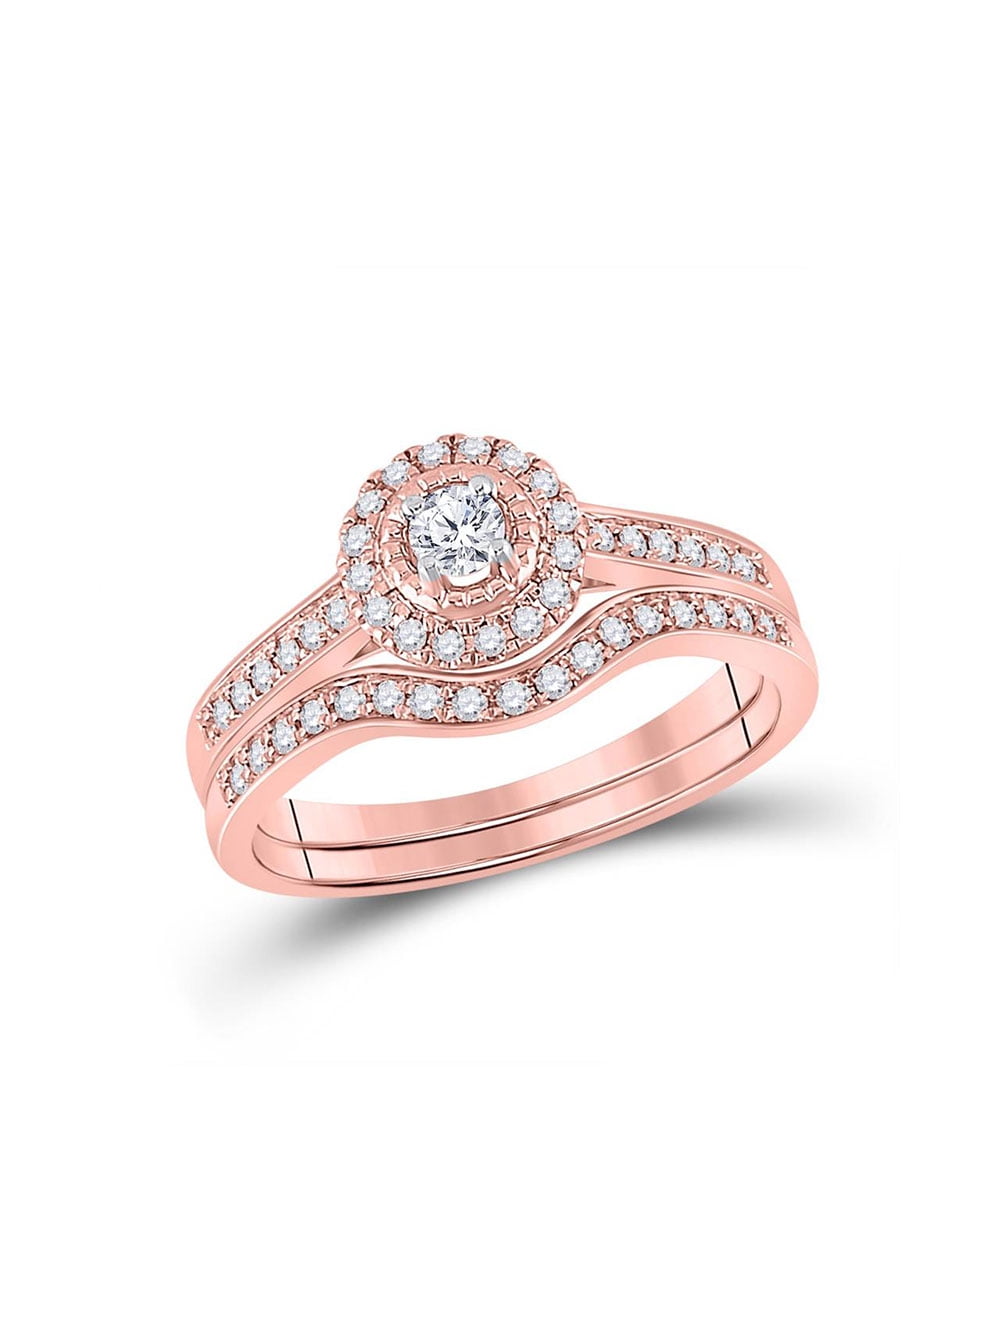 YourJewelryStore 10kt Rose Gold Round Diamond Halo Bridal